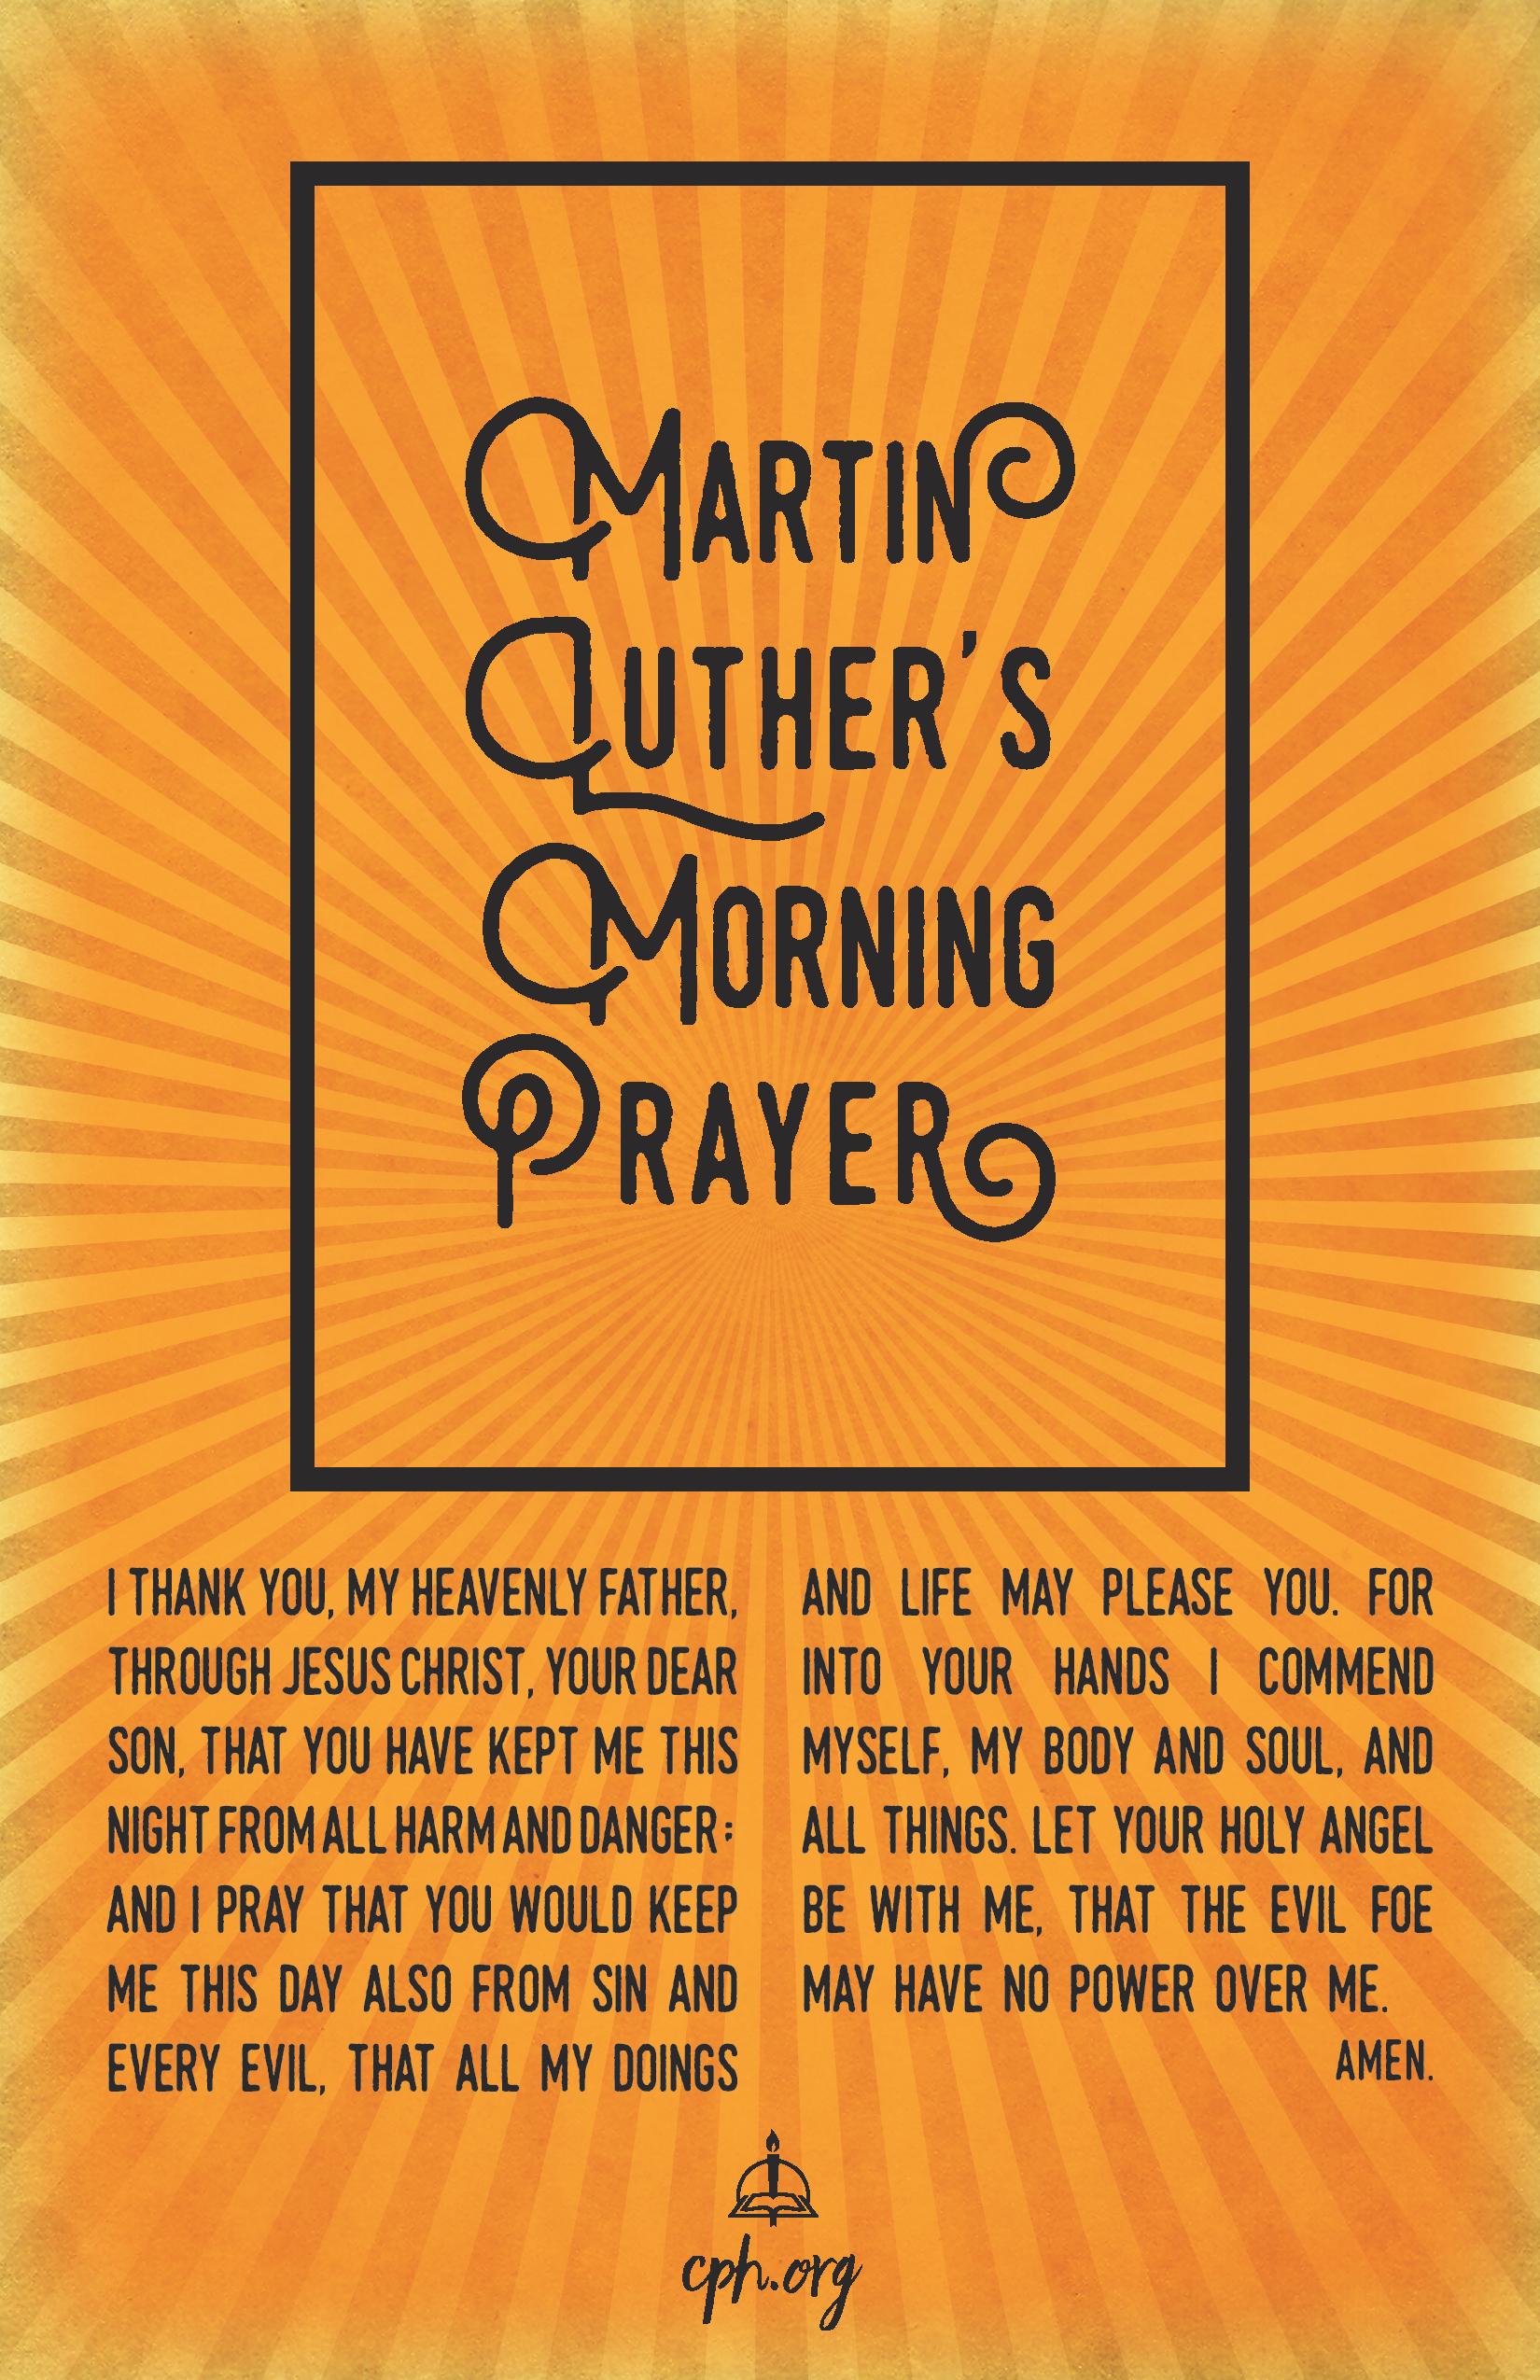 Luther's Morning Prayer Poster Download